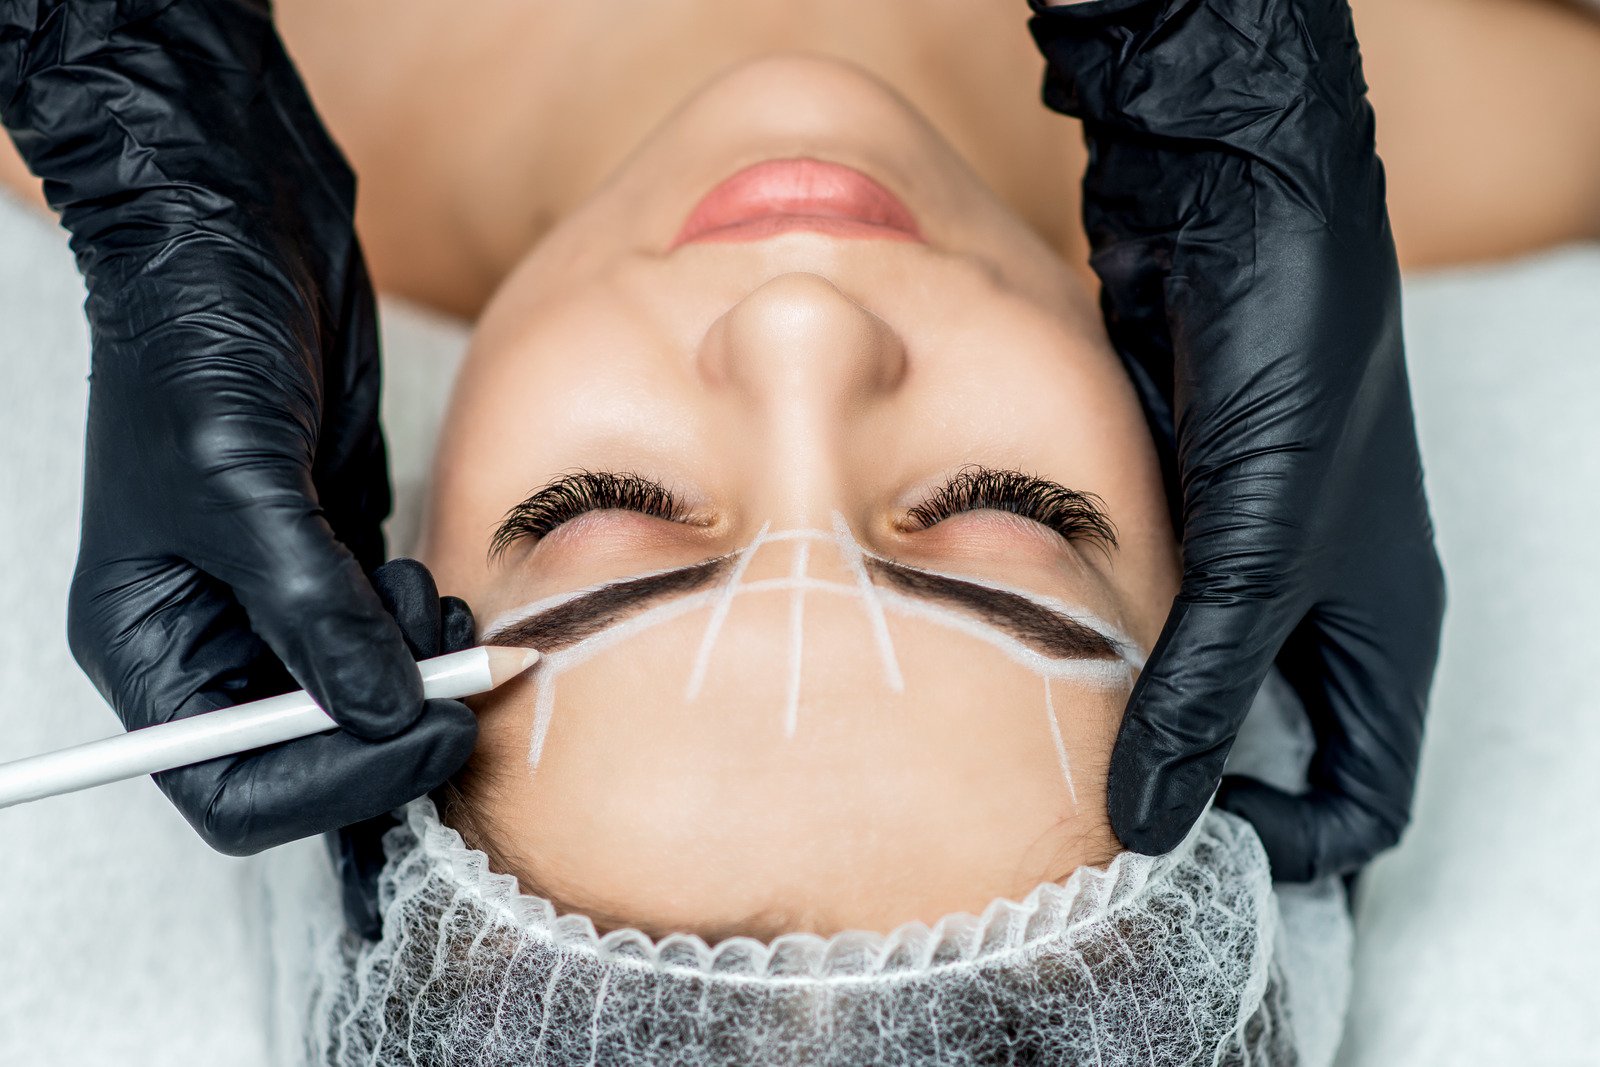 Image of someone getting permanent eyebrows.